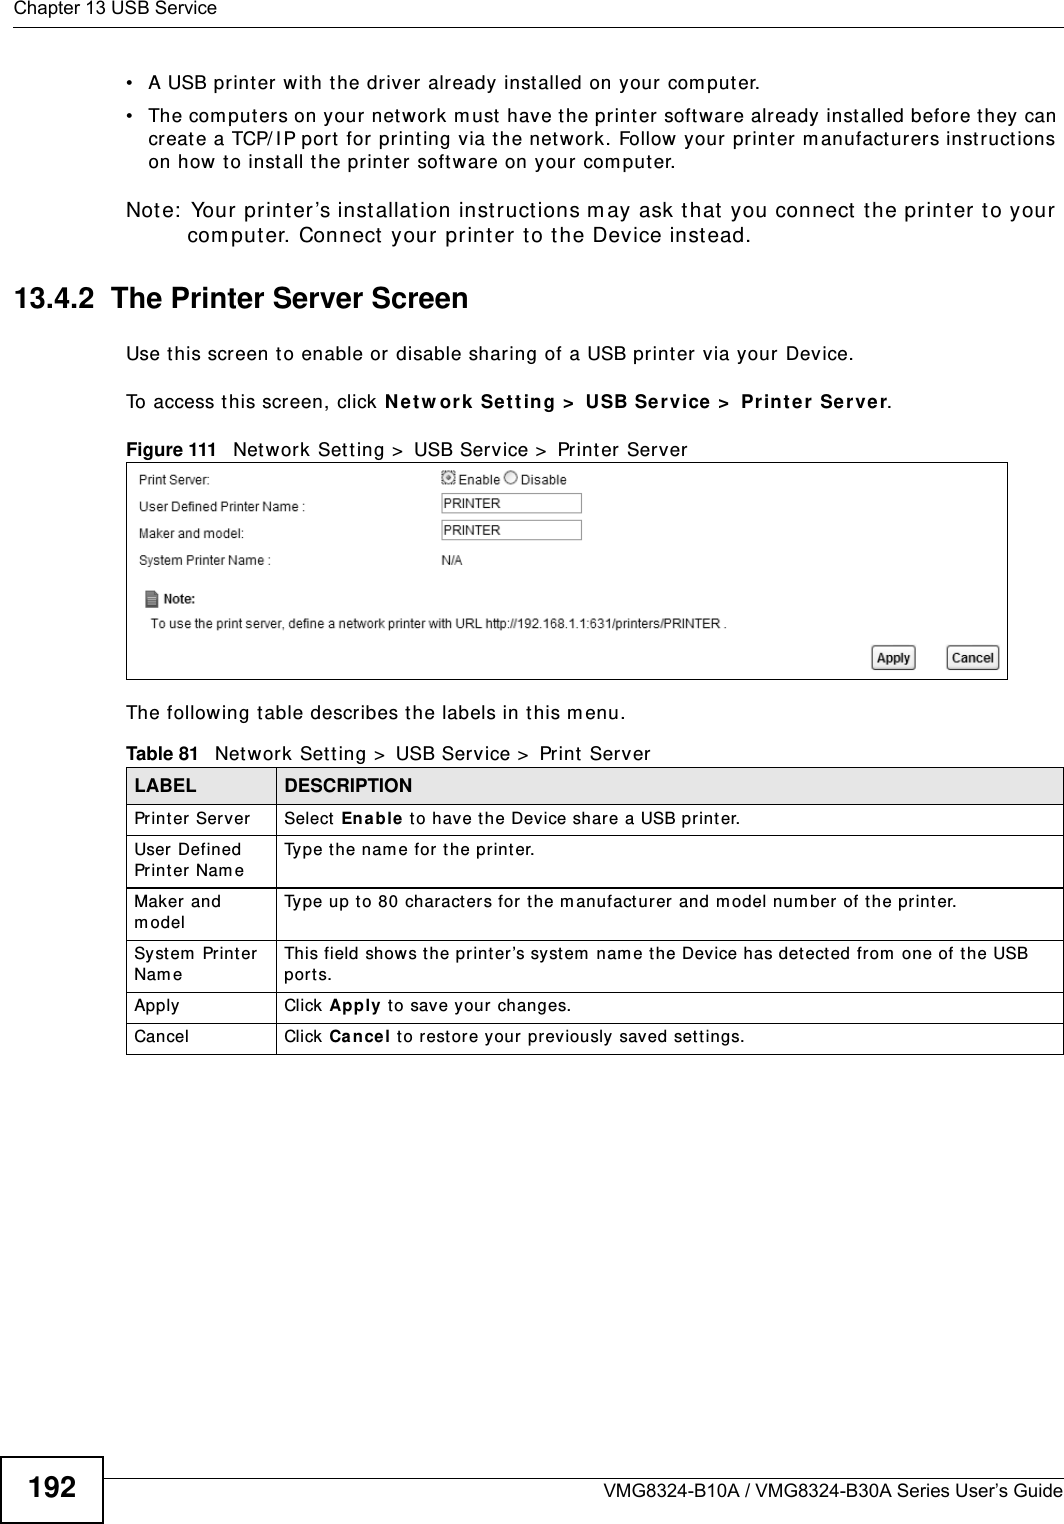 Chapter 13 USB ServiceVMG8324-B10A / VMG8324-B30A Series User’s Guide192• A USB print er wit h t he driver already installed on your com put er.• The com put ers on your net work m ust  have t he print er software already inst alled before they can create a TCP/ I P port  for printing via t he net work. Follow your  printer m anufact urers inst ructions on how t o inst all t he print er software on your com put er. Not e:  Your print er ’s inst allat ion instructions m ay ask t hat  you connect  t he print er to your com put er. Connect  your print er to t he Device instead.13.4.2  The Printer Server ScreenUse t his screen t o enable or disable sharing of a USB print er via your Device. To access t his screen, click N e t w or k  Set t ing &gt;  USB Se rvice &gt;  Print e r  Server.Figure 111   Network Sett ing &gt;  USB Service &gt;  Print er  ServerThe following t able describes t he labels in this m enu.Table 81   Net work Set t ing &gt;  USB Service &gt;  Print  ServerLABEL DESCRIPTIONPrinter Server   Select Enable t o have t he Device share a USB printer.User Defined Printer Nam eType t he nam e for t he print er.Maker and m odelType up t o 80 characters for t he m anufacturer and m odel num ber of t he printer.Syst em  Print er  Nam eThis field shows the pr int er’s system  nam e the Device has det ected from  one of t he USB port s.Apply Click Apply t o save y our  changes.Cancel Click Can cel t o rest ore your previously saved set t ings.